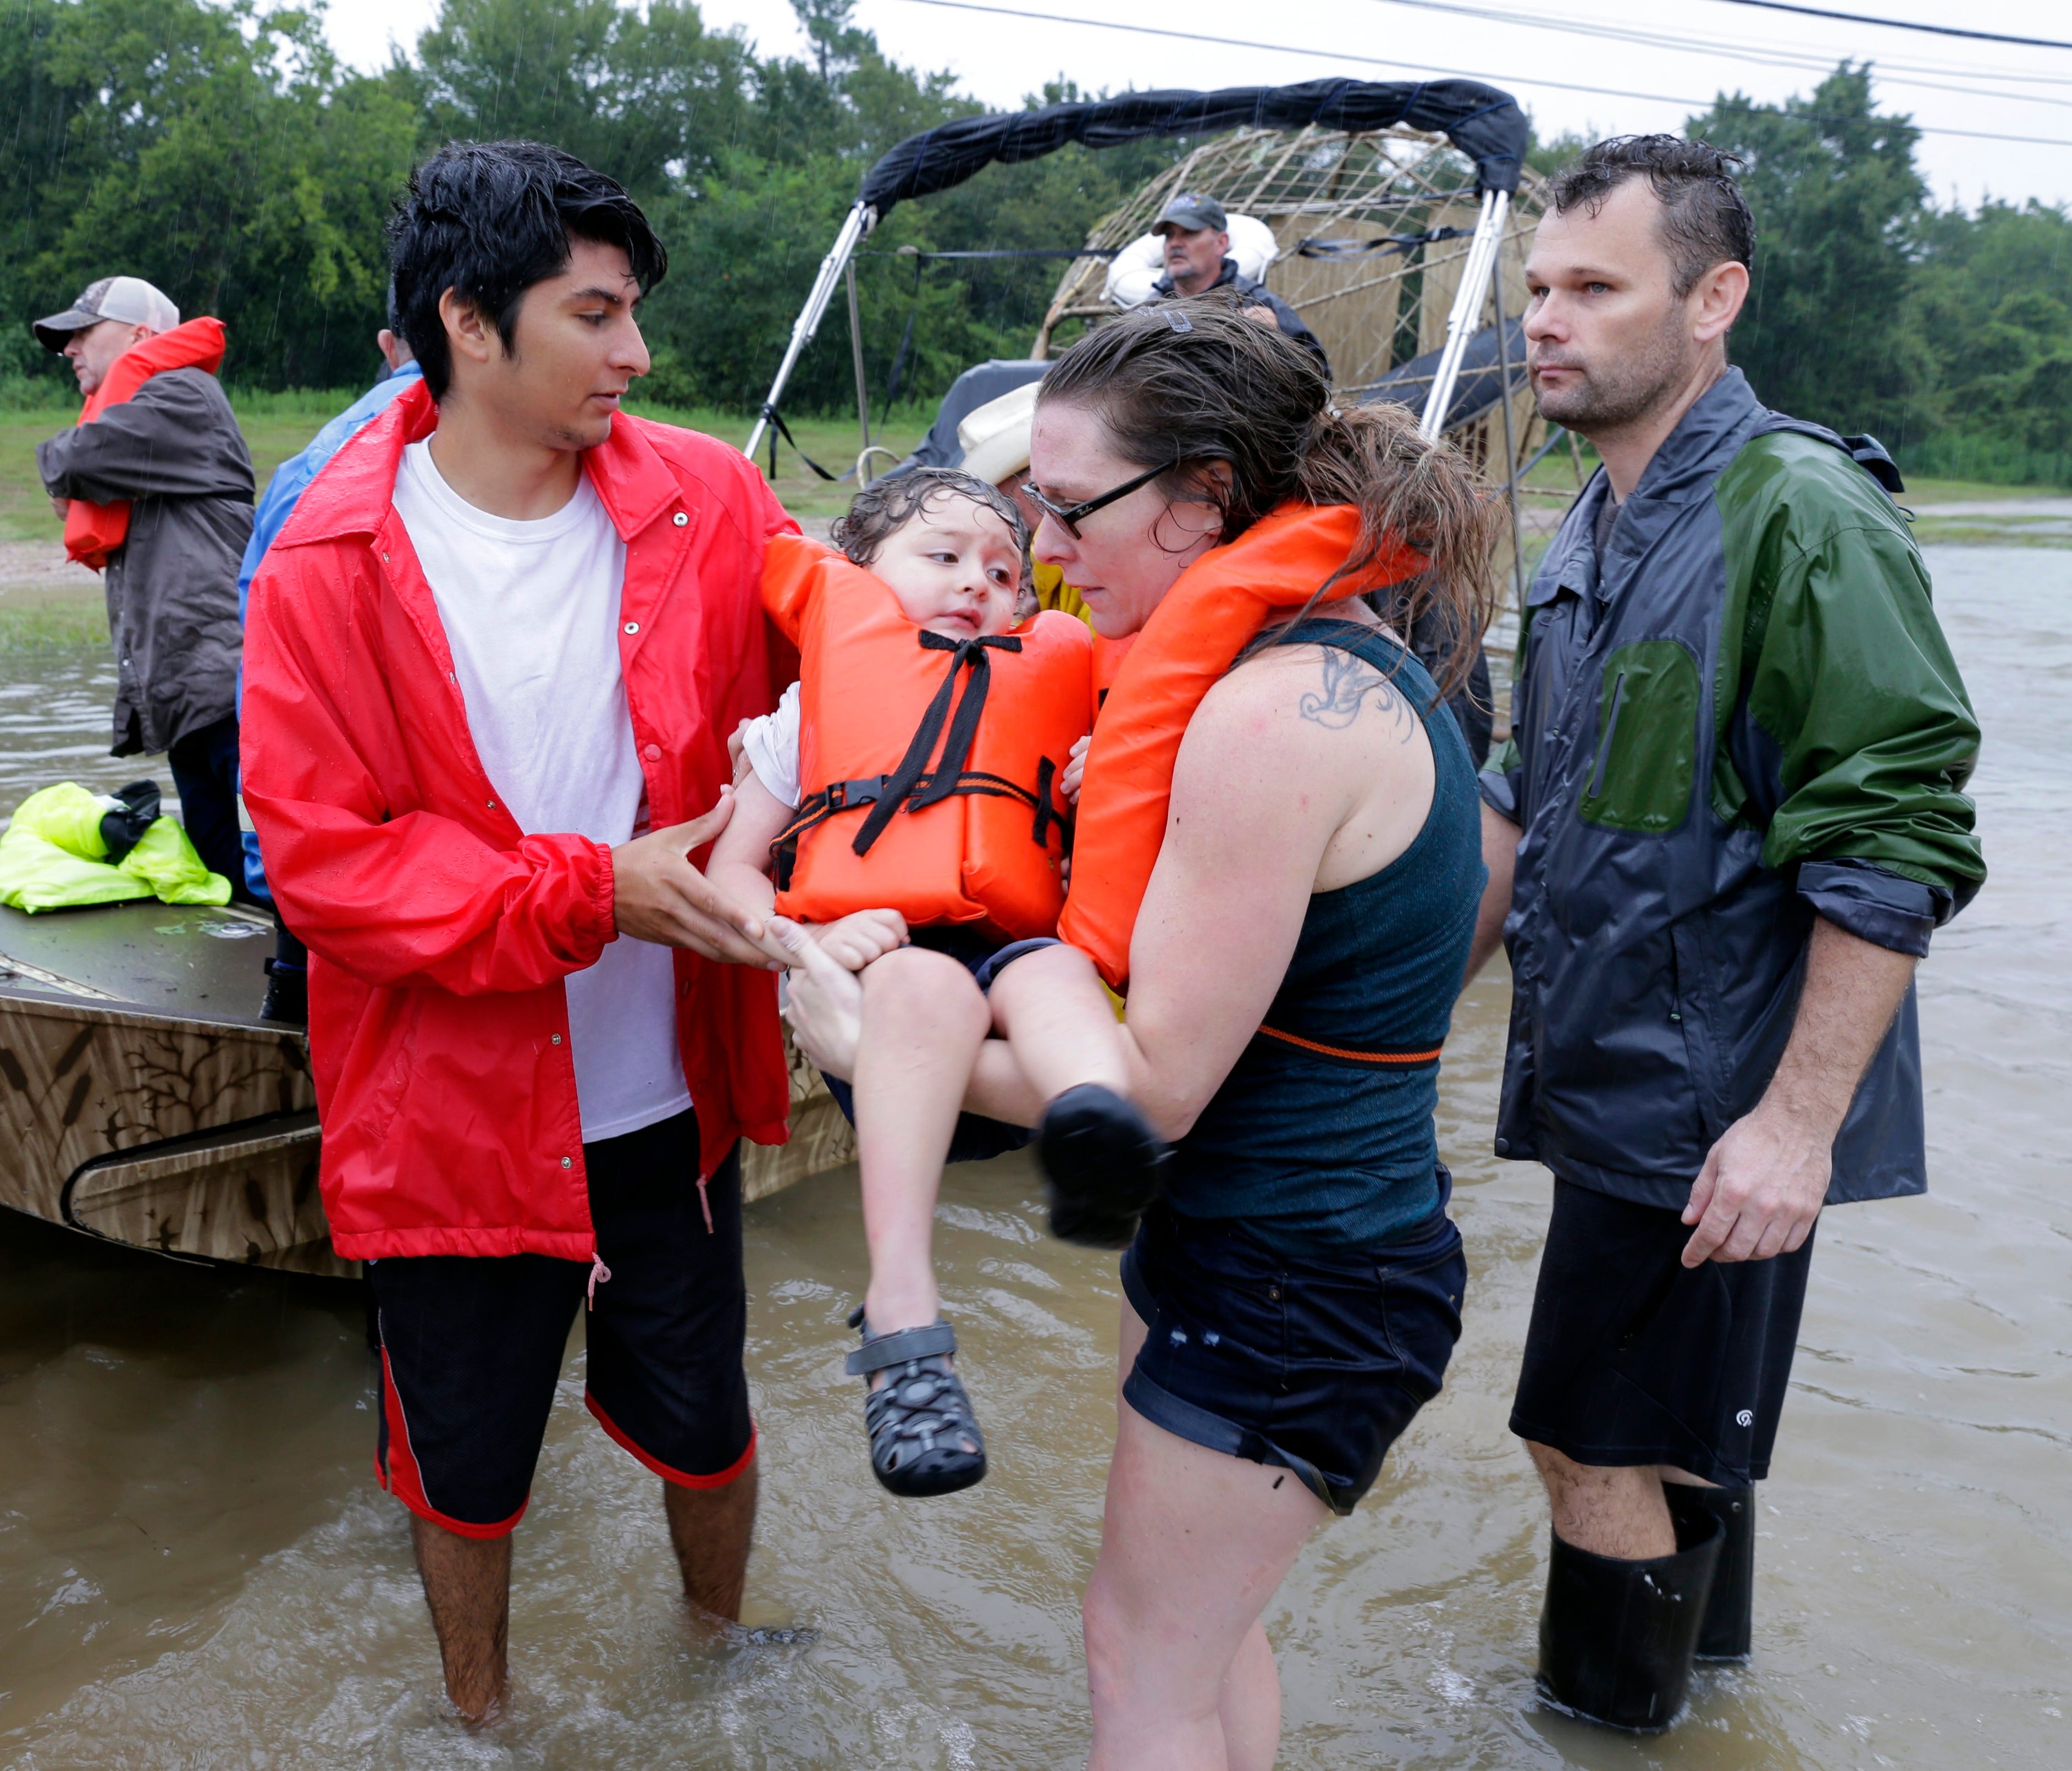  Mindy Walker and her three year old son Connor Martinez are helped out of a boat after being rescued from their home along Cypress Creek at Kuykendal 15 miles northwest of downtown Houston, Texas on Aug. 28, 2017. The areas in and around Houston and